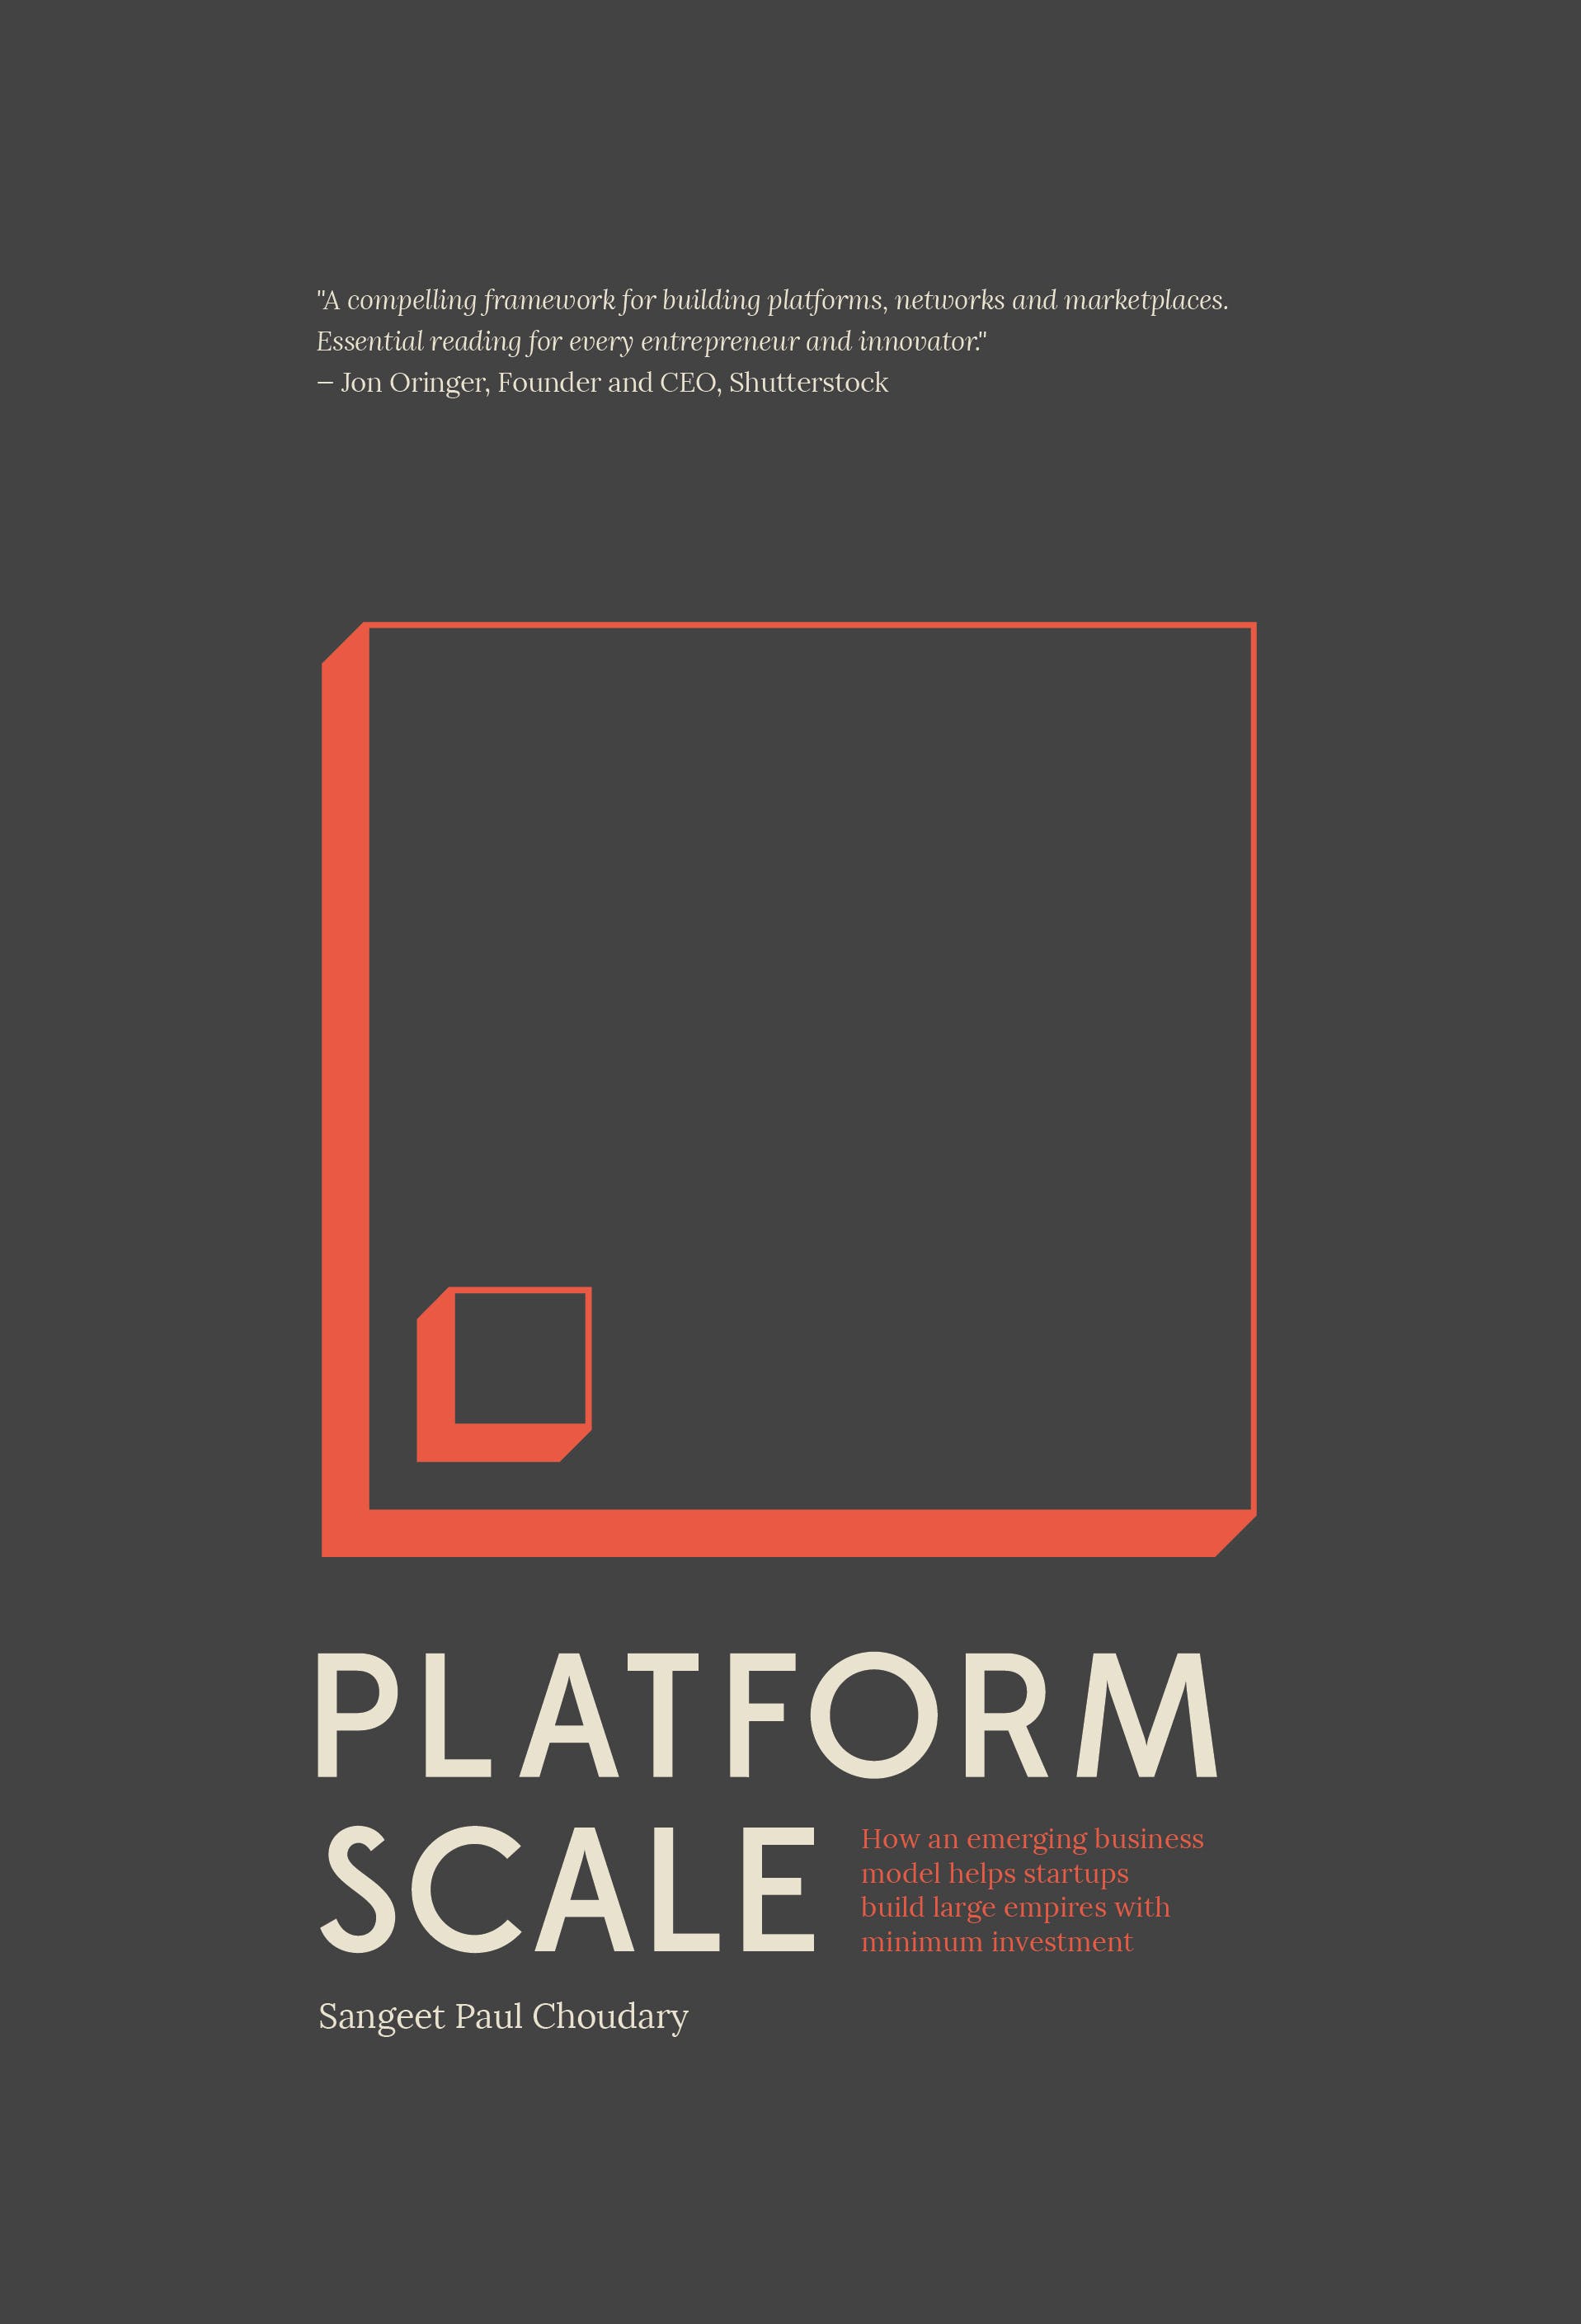 Platform Scale (Free download to Kindle from October 5th to 9th) media 1